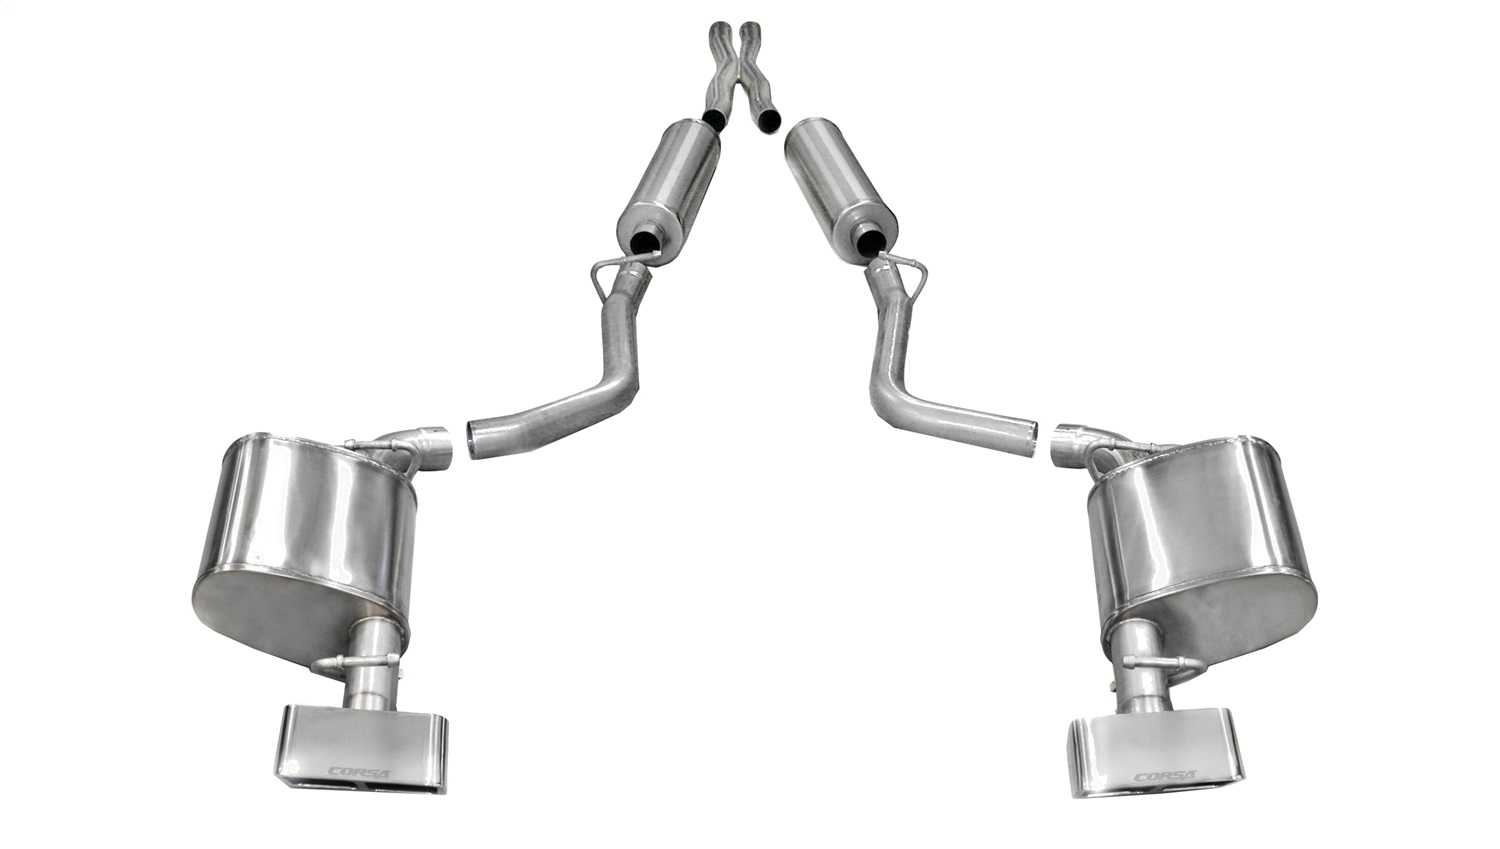 Corsa Performance Corsa Performance 14527 Sport Cat-Back Exhaust System Fits 11-14 Challenger